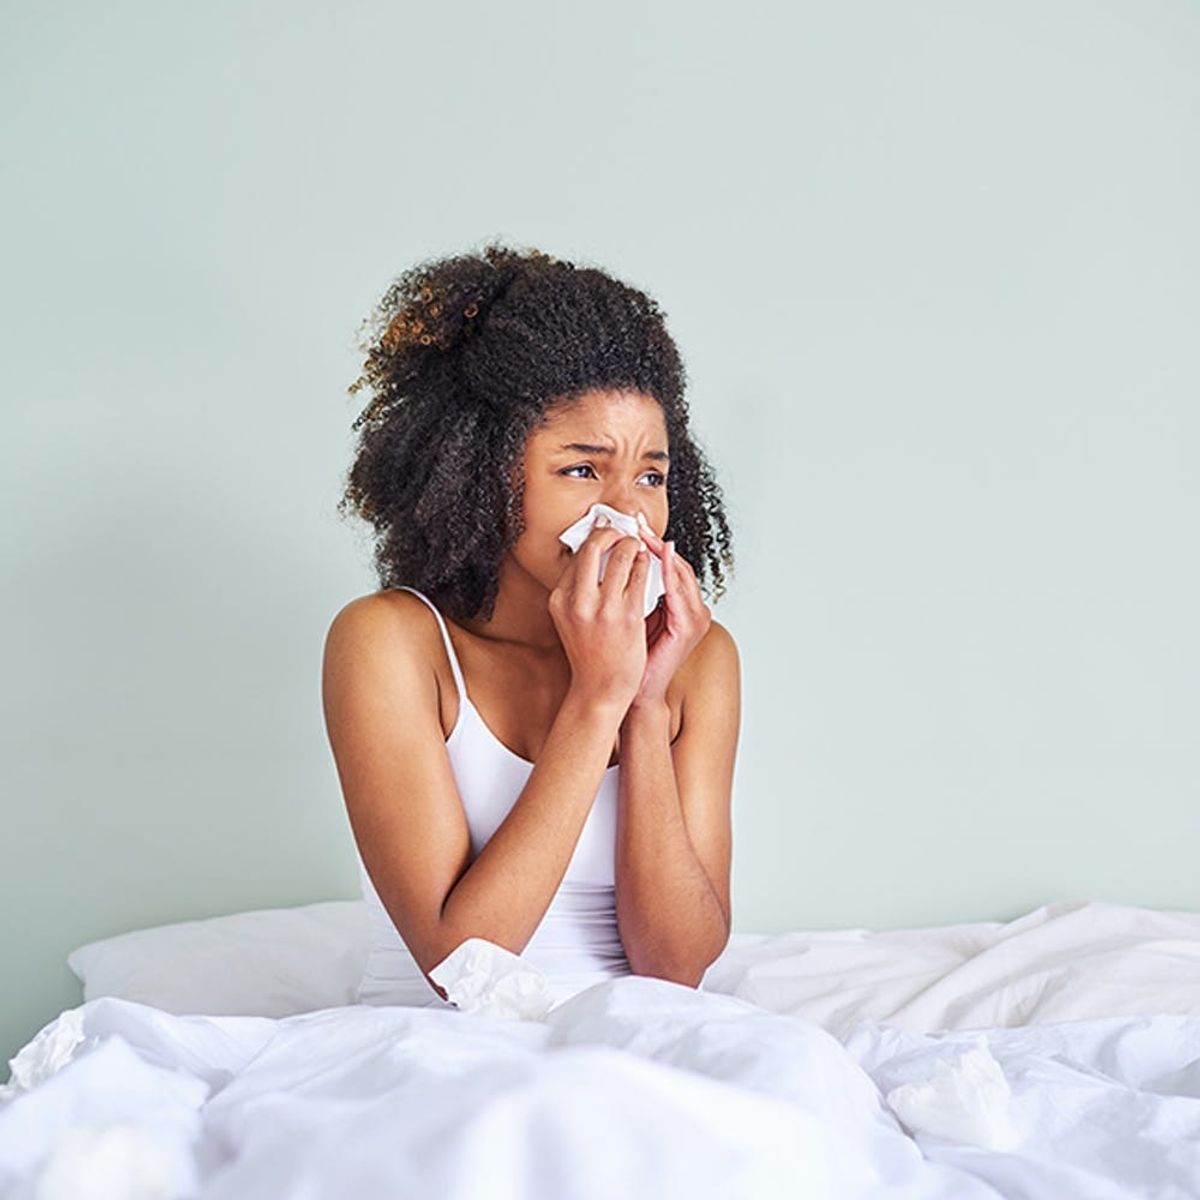 Why You Should Be Worried About Flu-Related Complications This Season